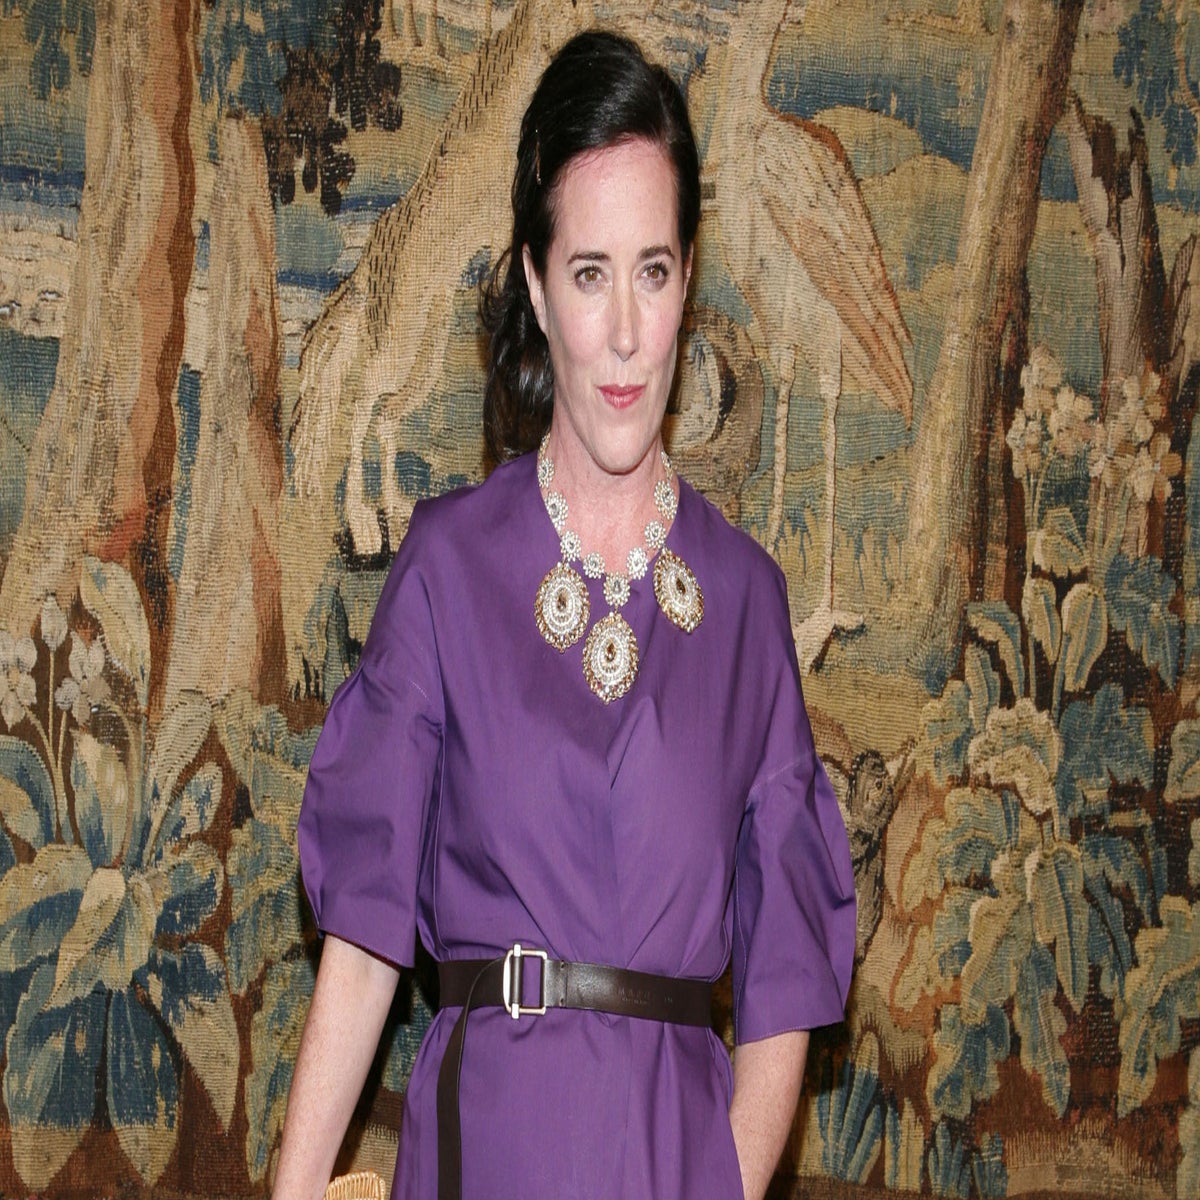 Kate Spade: Pressure of maintaining image prevented designer seeking help  for mental health problems that left her suicidal, sister says | The  Independent | The Independent